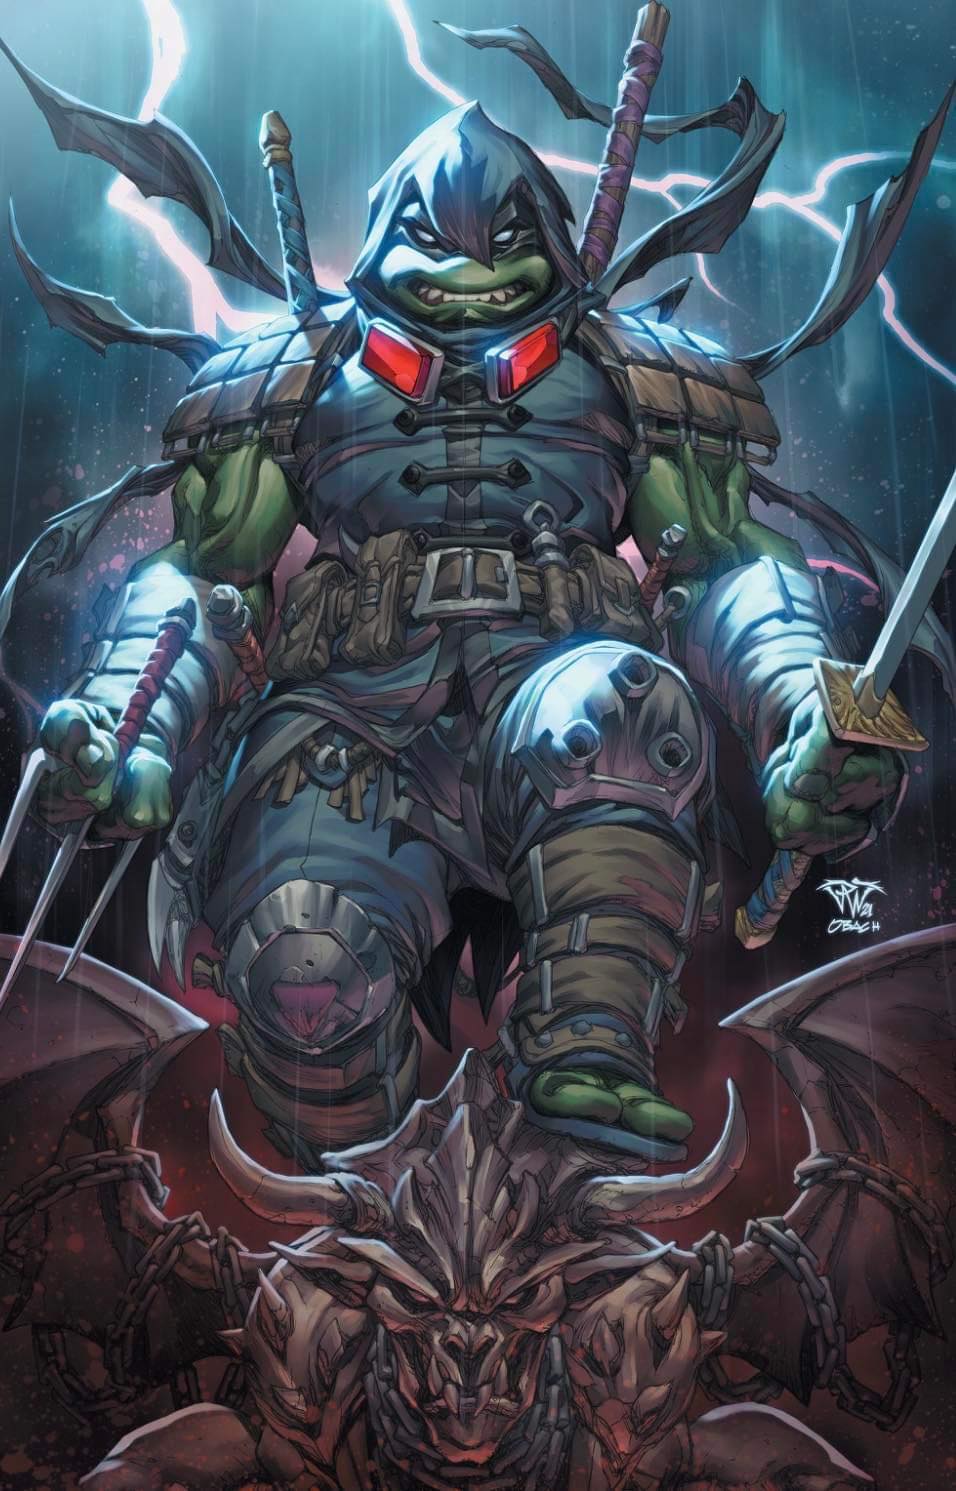 TMNT LAST RONIN LOST DAY SPECIAL #1 IVAN TAO & PAOLO PANTALENA EXCLUSIVE VARIANT OPTIONS  -  5/24/2023